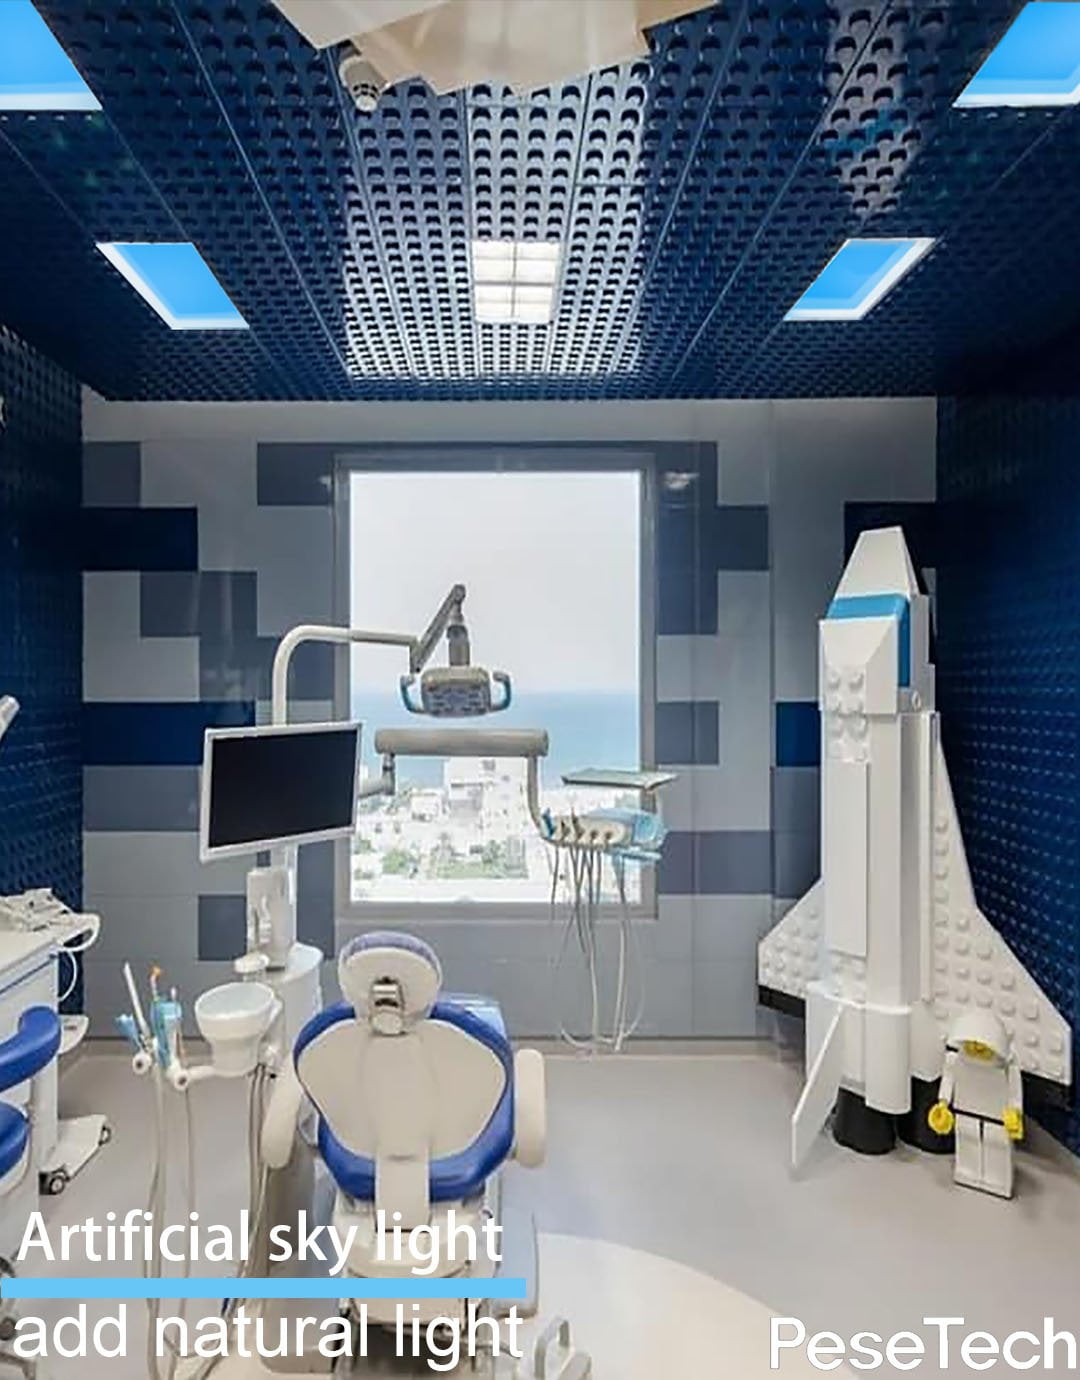 Artificial sky lights installed in a dental office.